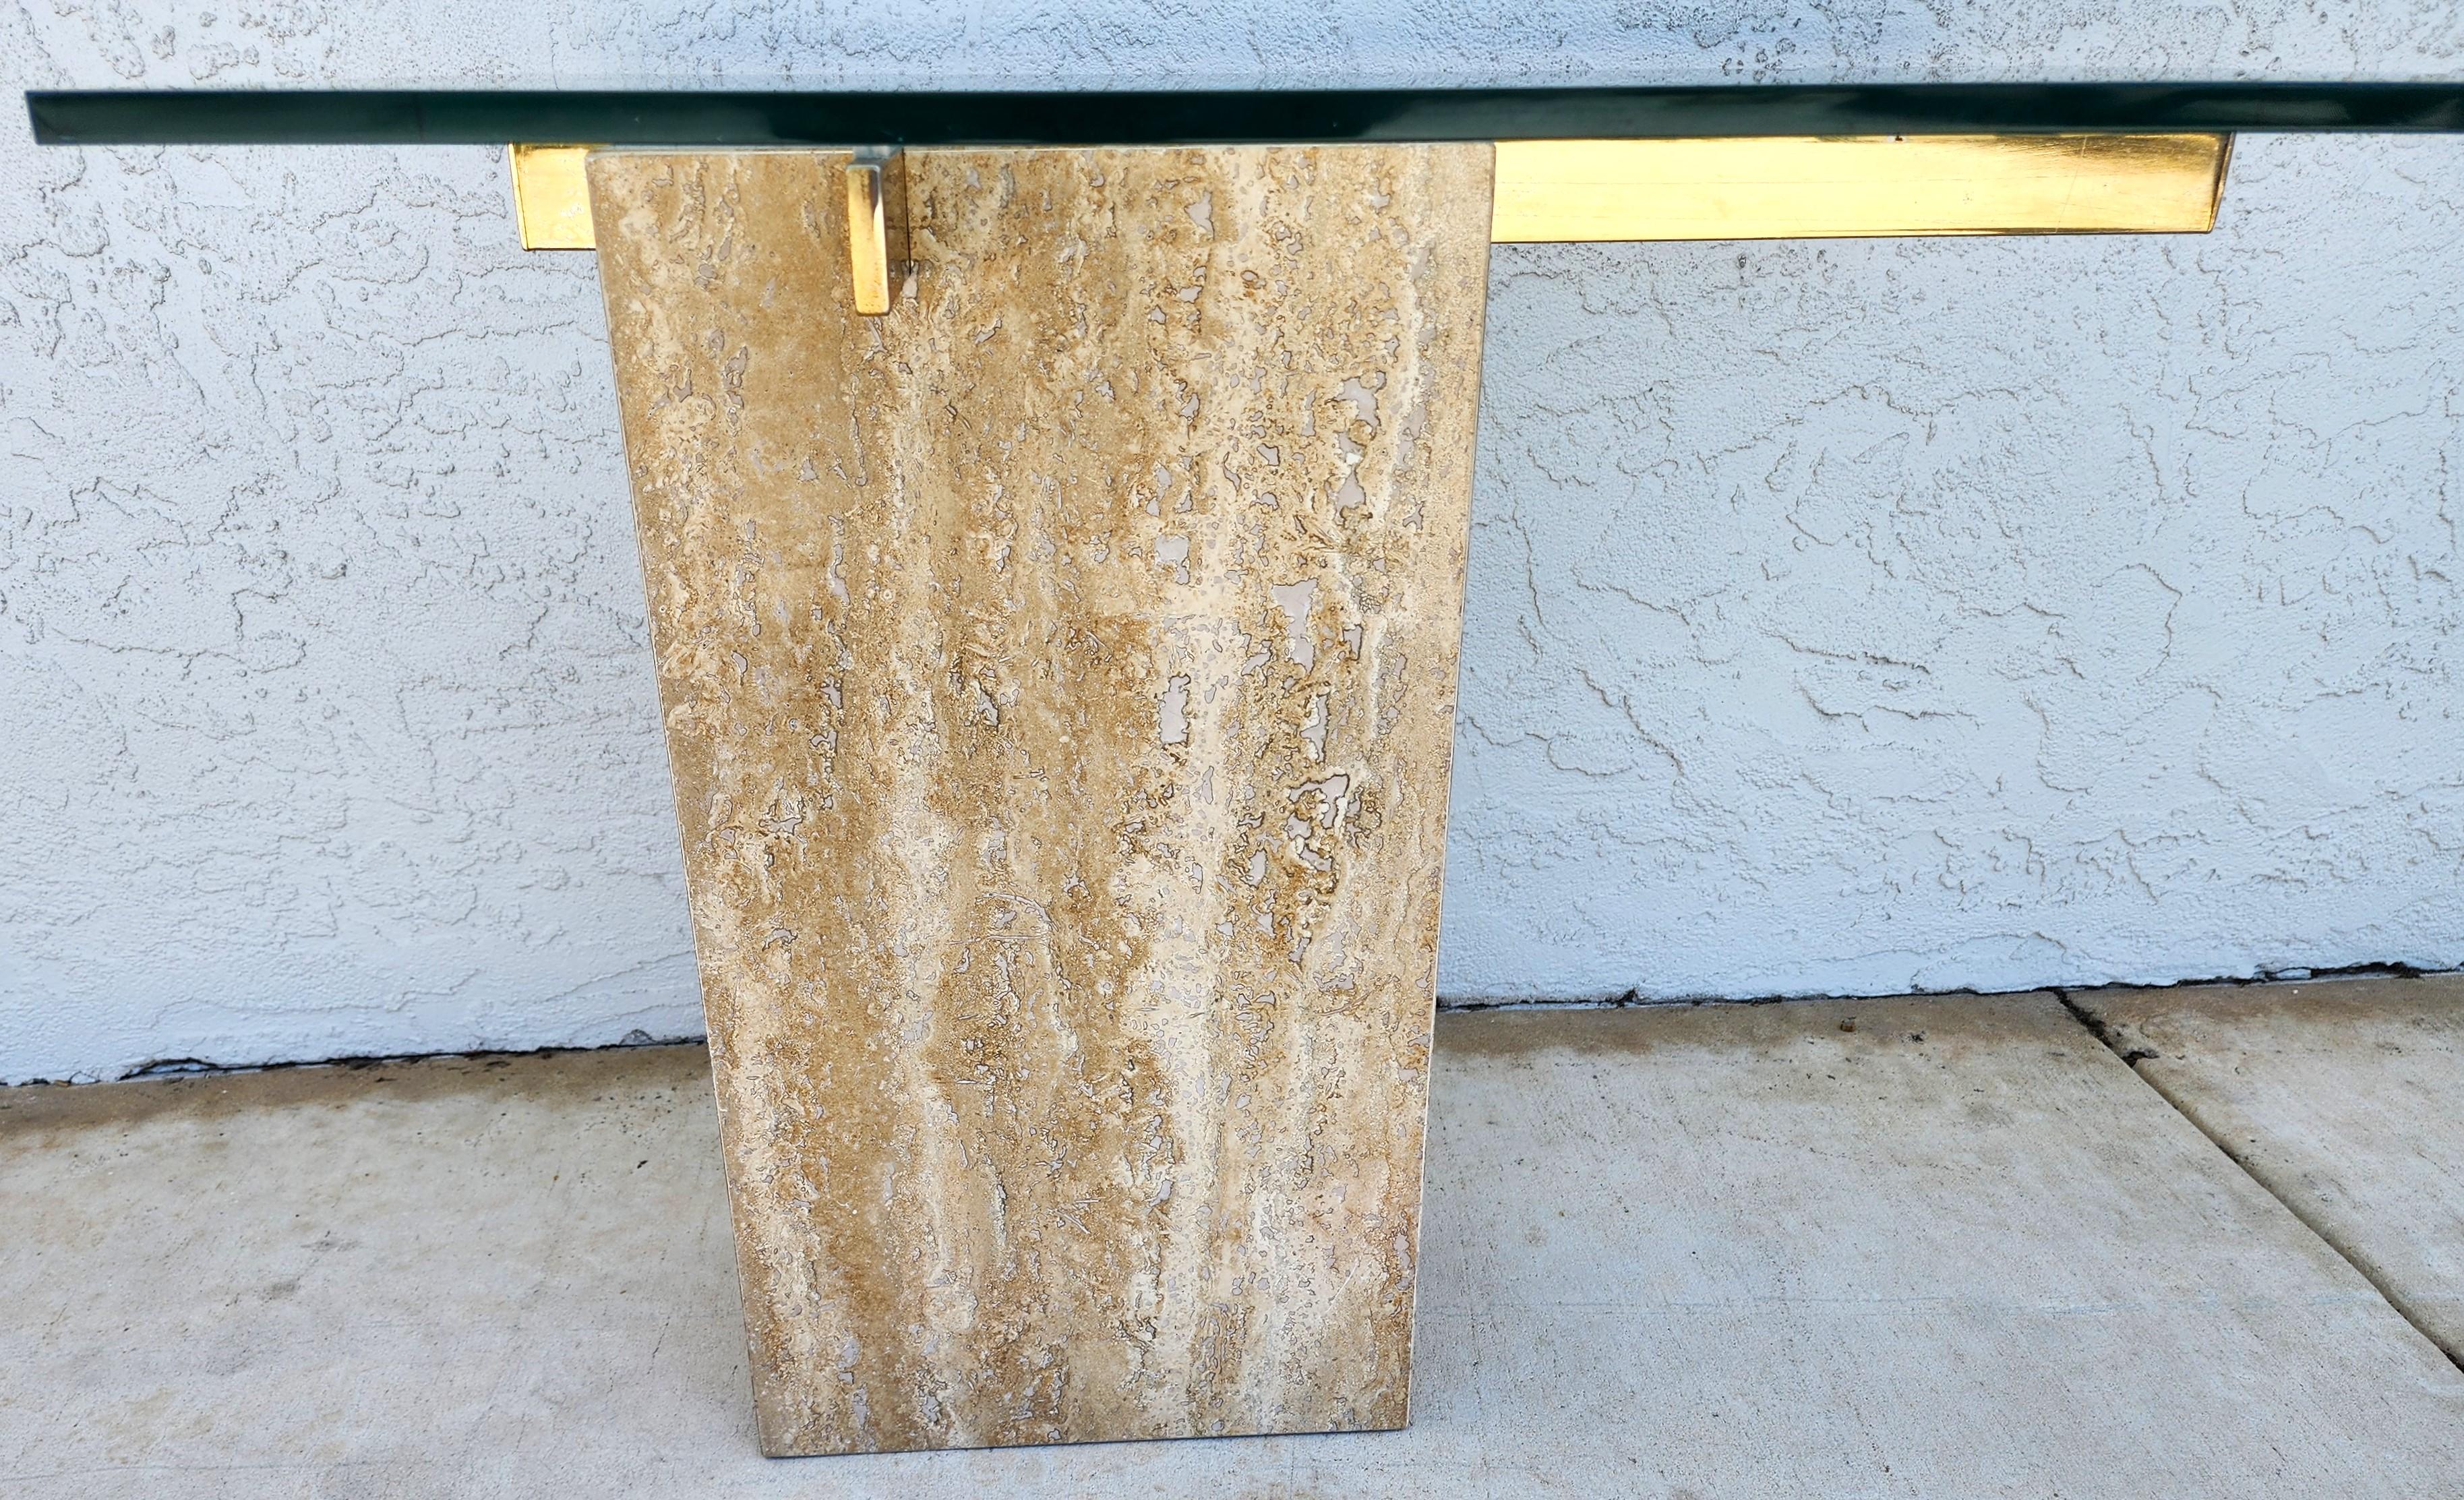 For FULL item description click on CONTINUE READING at the bottom of this page.

Offering One Of Our Recent Palm Beach Estate Fine Furniture Acquisitions Of A
1970s Travertine Side Table Marble Glass by ARTEDI

Approximate Measurements in Inches
22